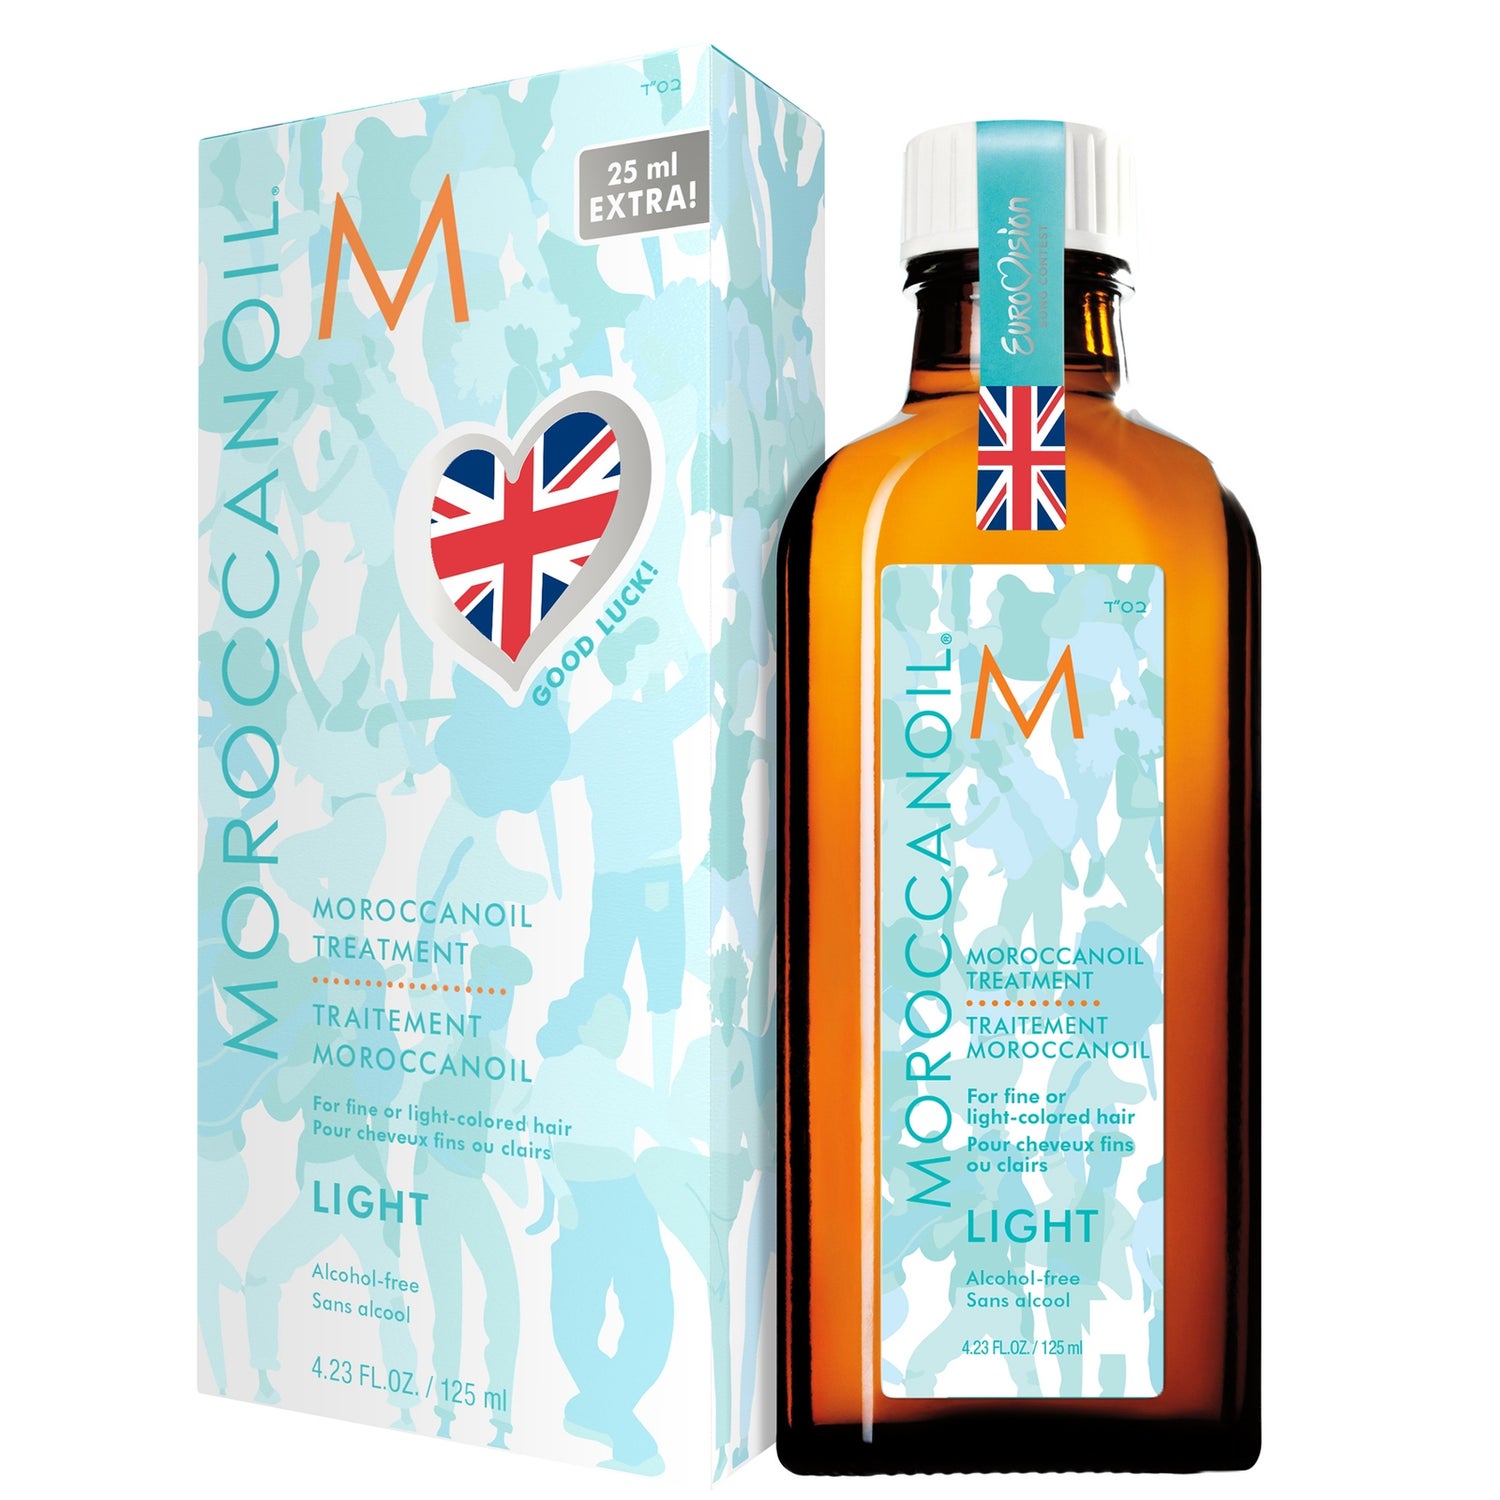 Moroccanoil Be An Original Light Treatment 125ml (Includes 25% Extra Free) (Worth £45.56)